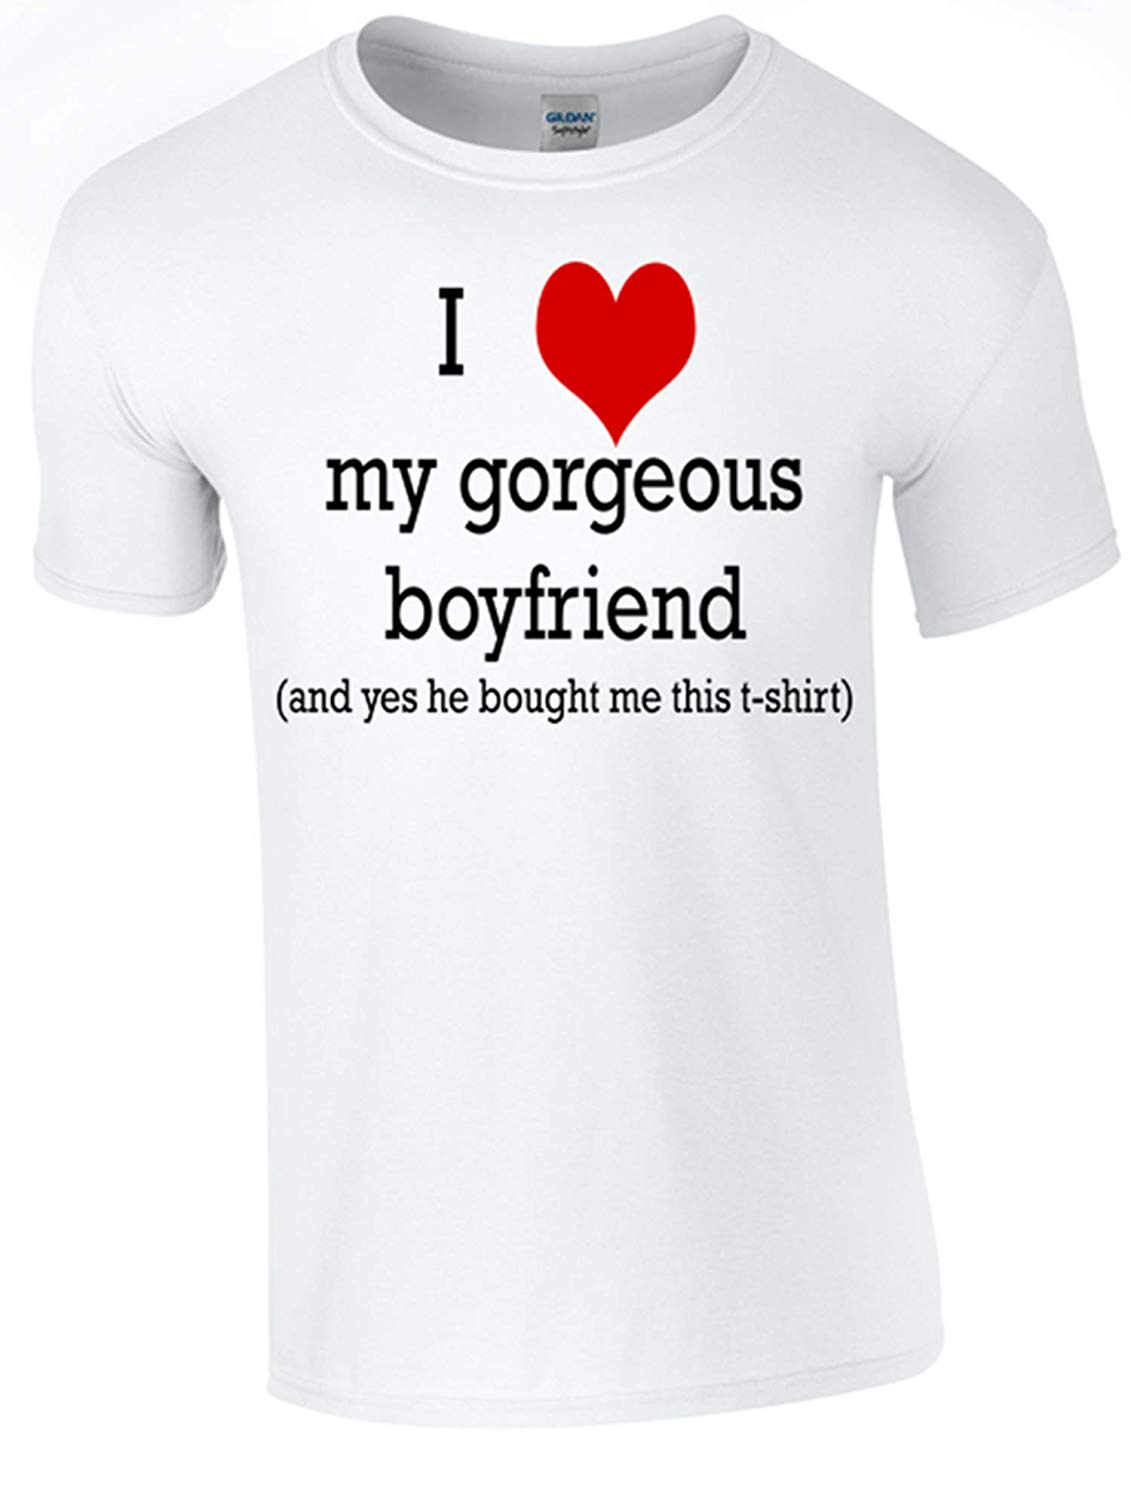 Army 1157 Kit Valentine My Gorgeous Boyfriend T-Shirt Printed DTG (Direct to Garment) for a Permanent Finish - Army 1157 kit White / XL Army 1157 Kit Veterans Owned Business